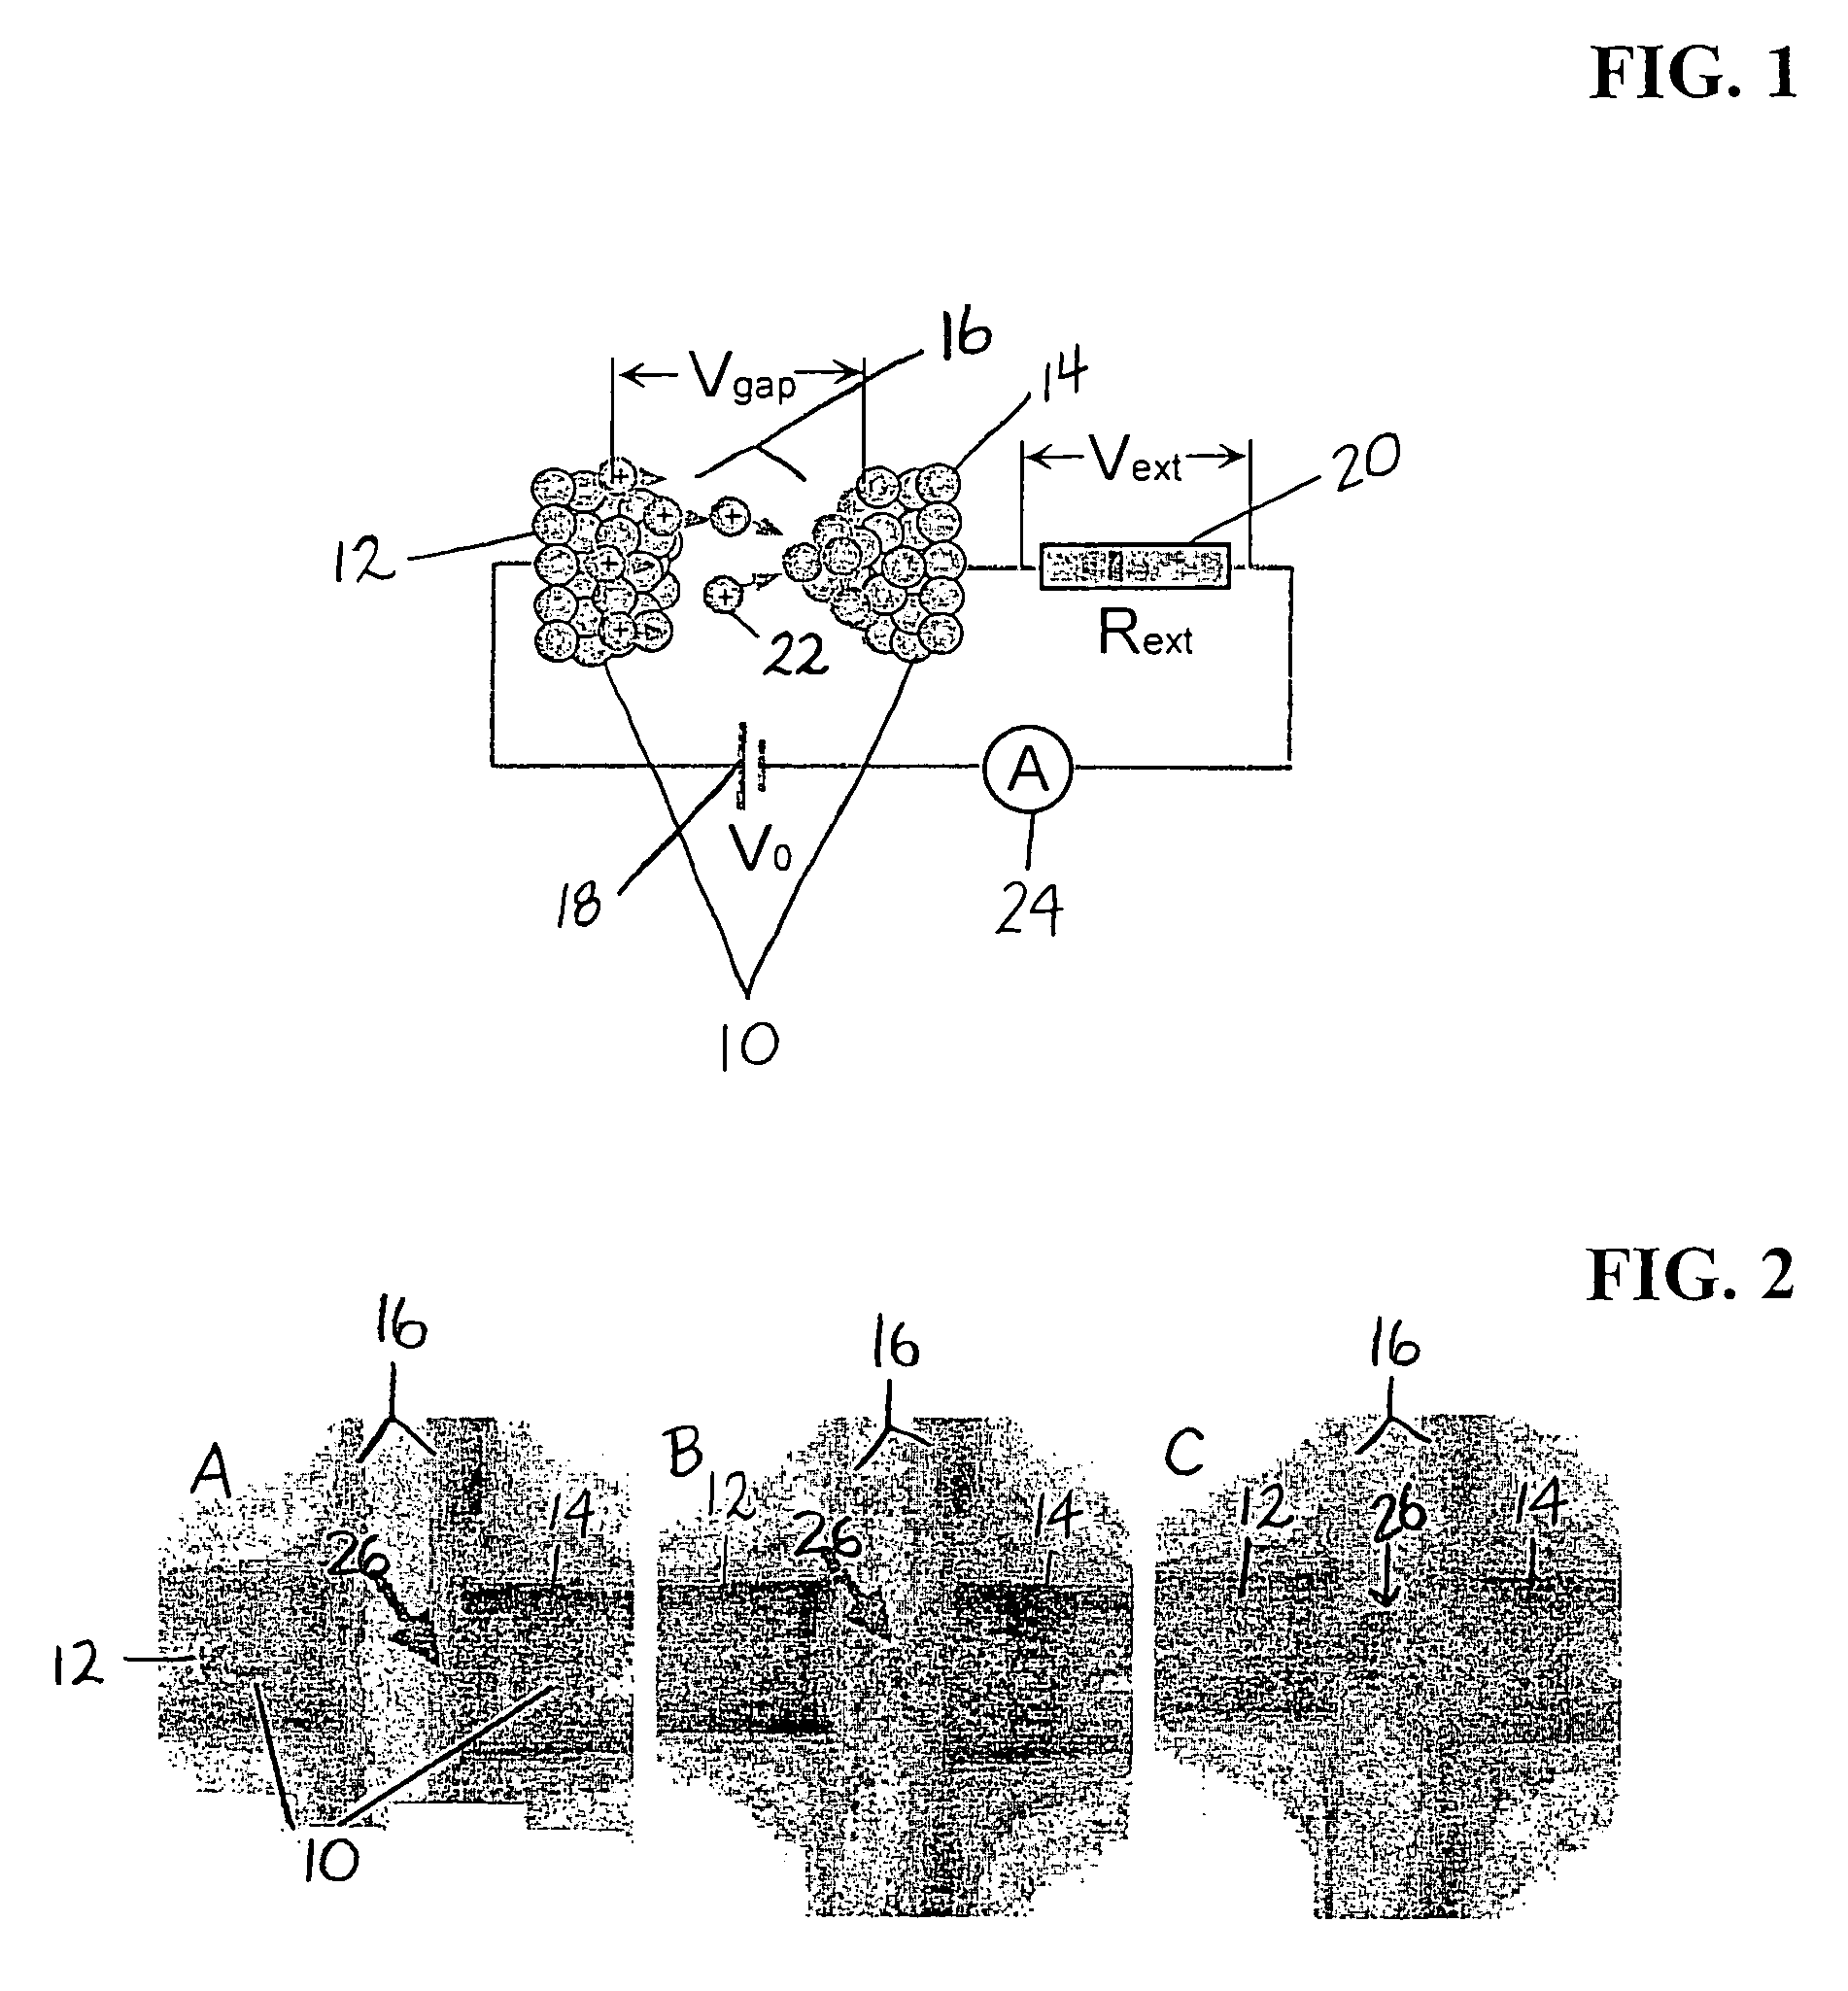 Apparatus and method for fabricating arrays of atomic-scale contacts and gaps between electrodes and applications thereof